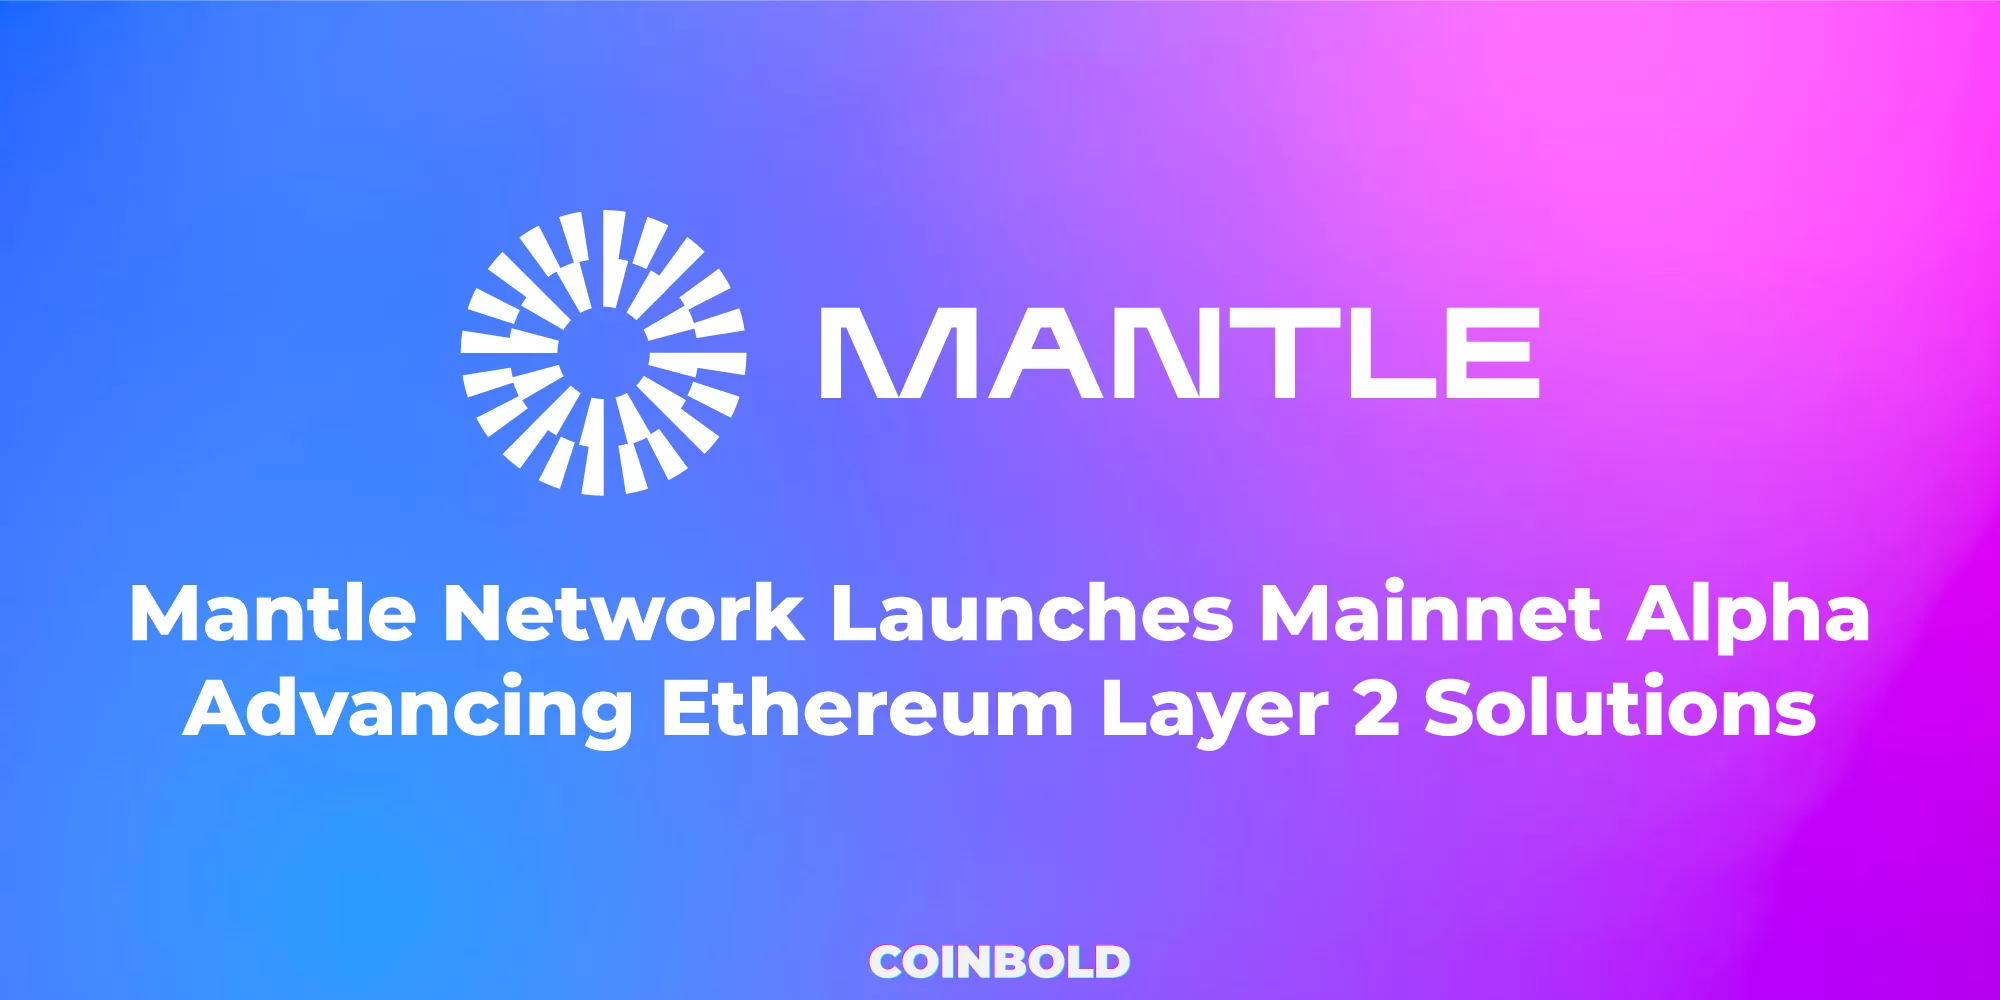 Mantle Network Launches Mainnet Alpha: Advancing Ethereum Layer 2 Solutions